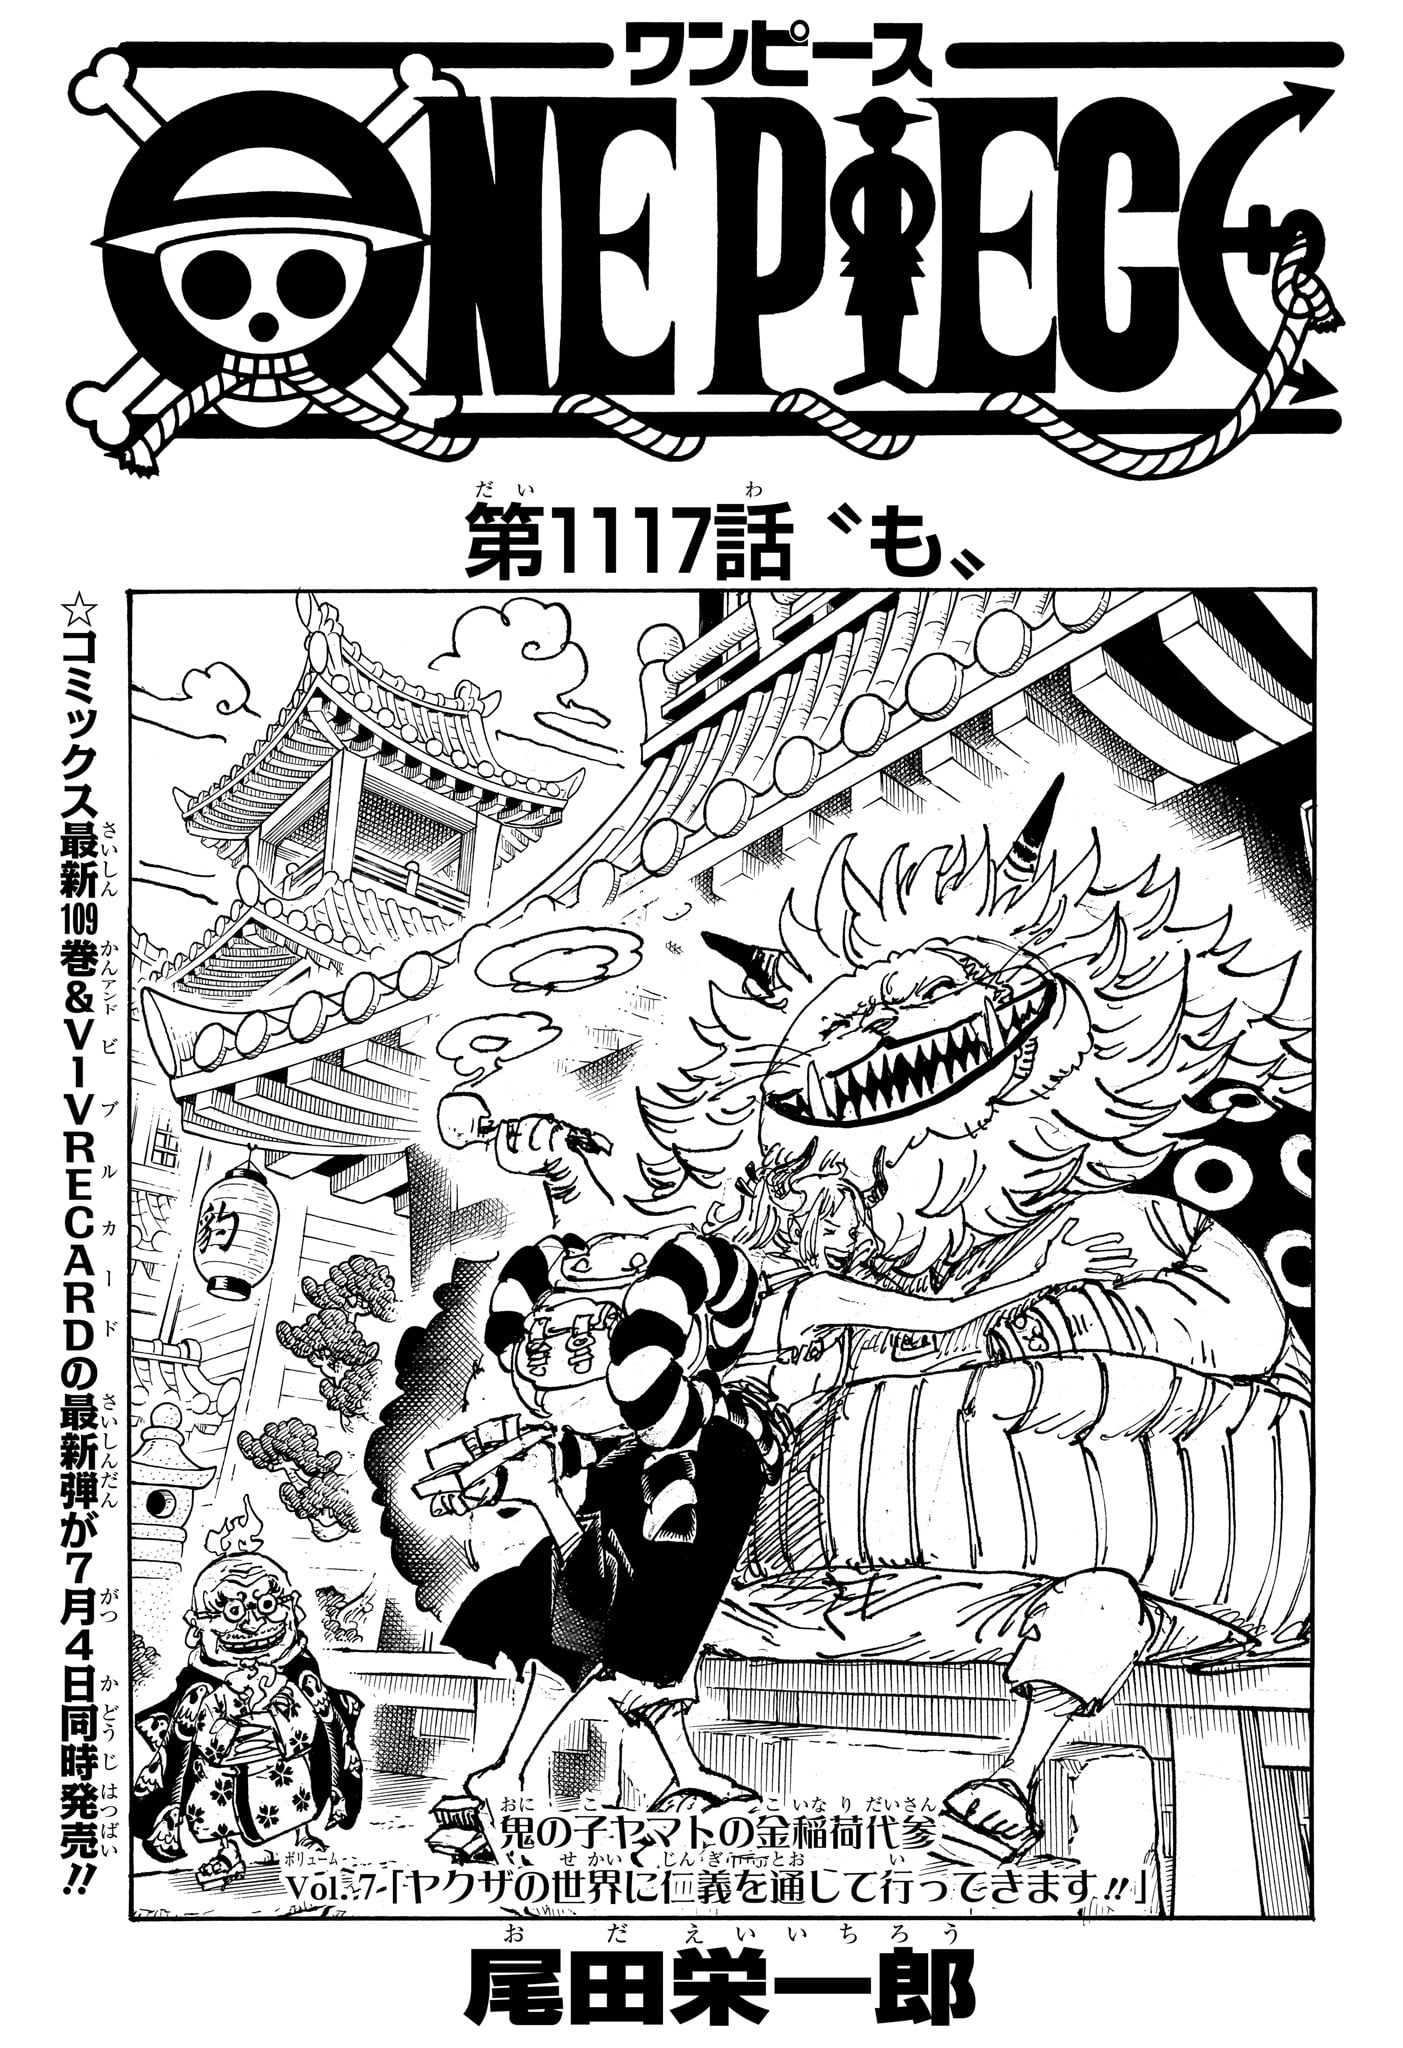 One Piece - Chapter 1117 - Page 1